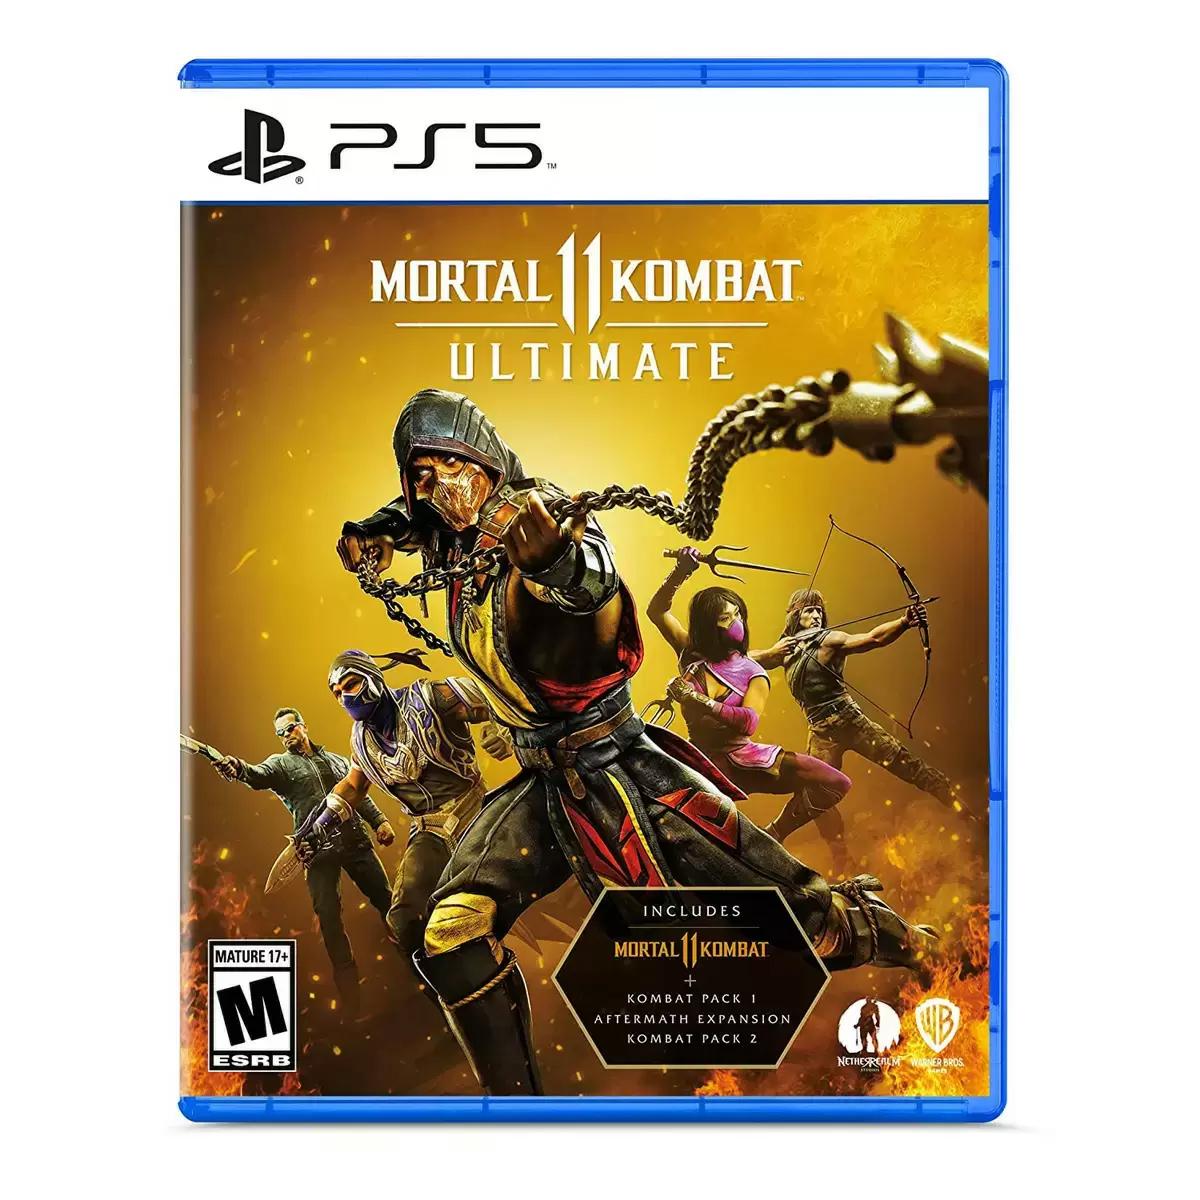 Mortal Kombat 11 Ultimate Edition Playstation 5 or Xbox for $29.99